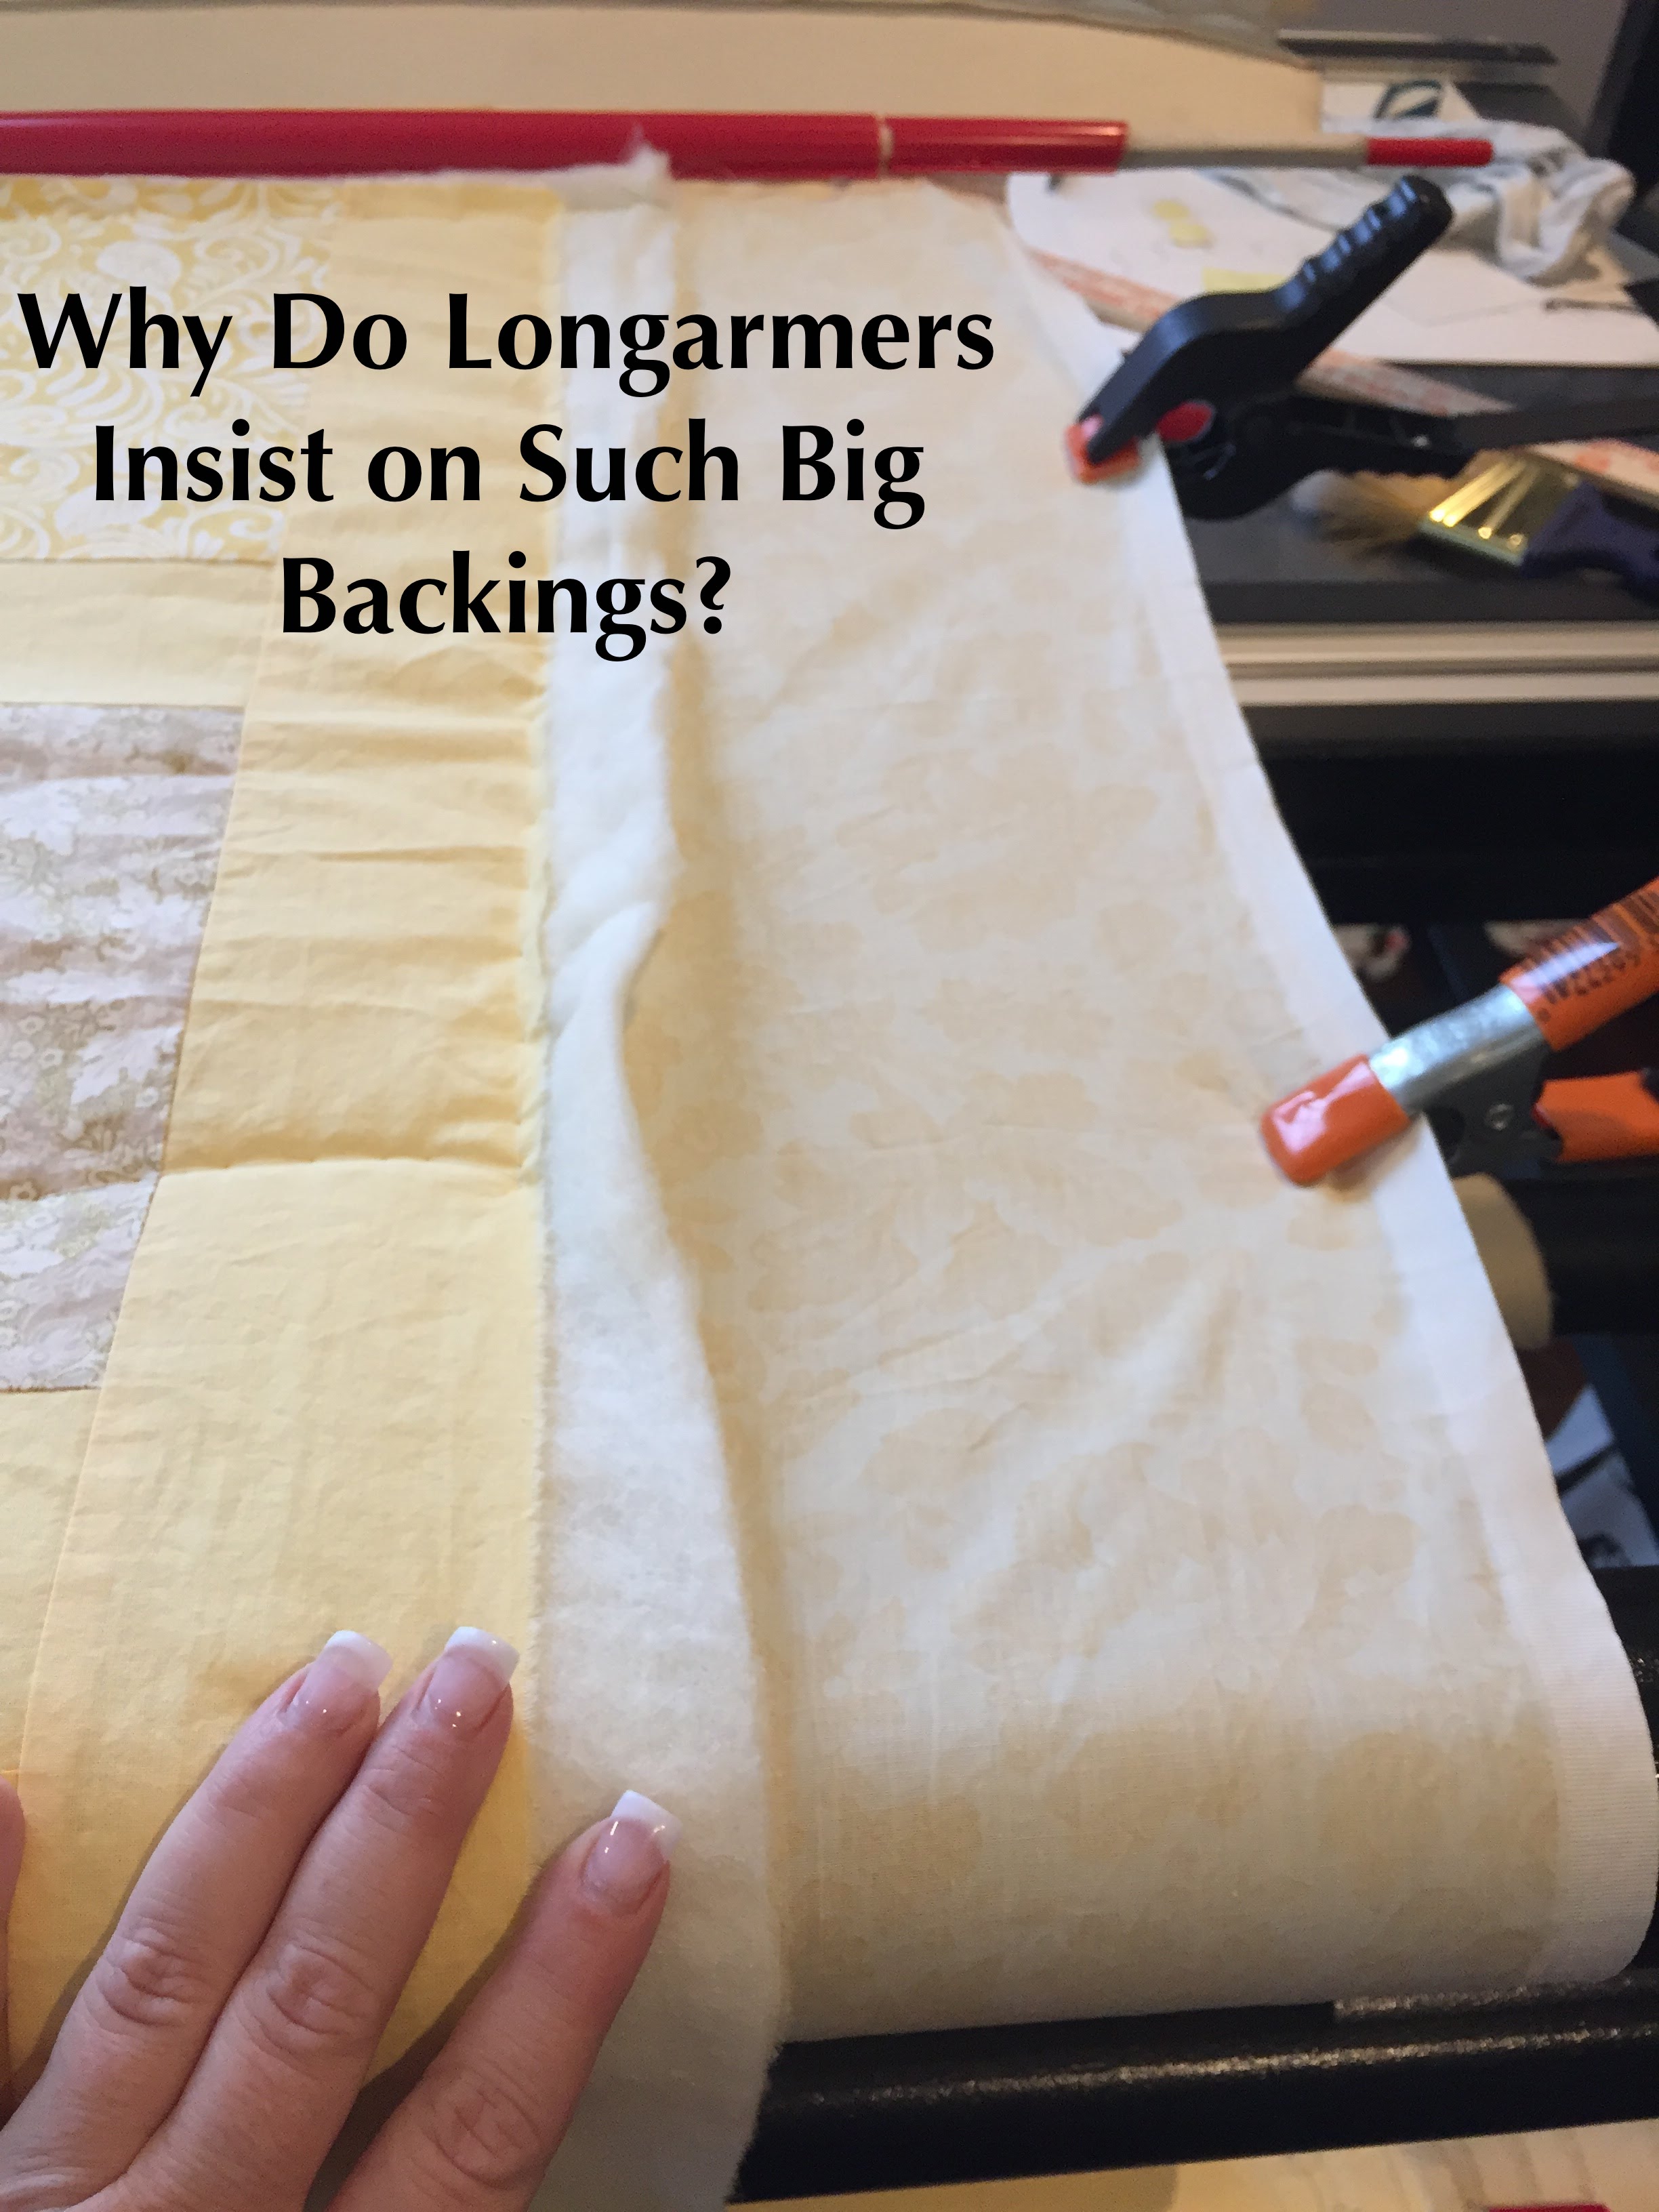 Why Do Longarmers Insist on Such Big Backings? Click through and see my explanation.